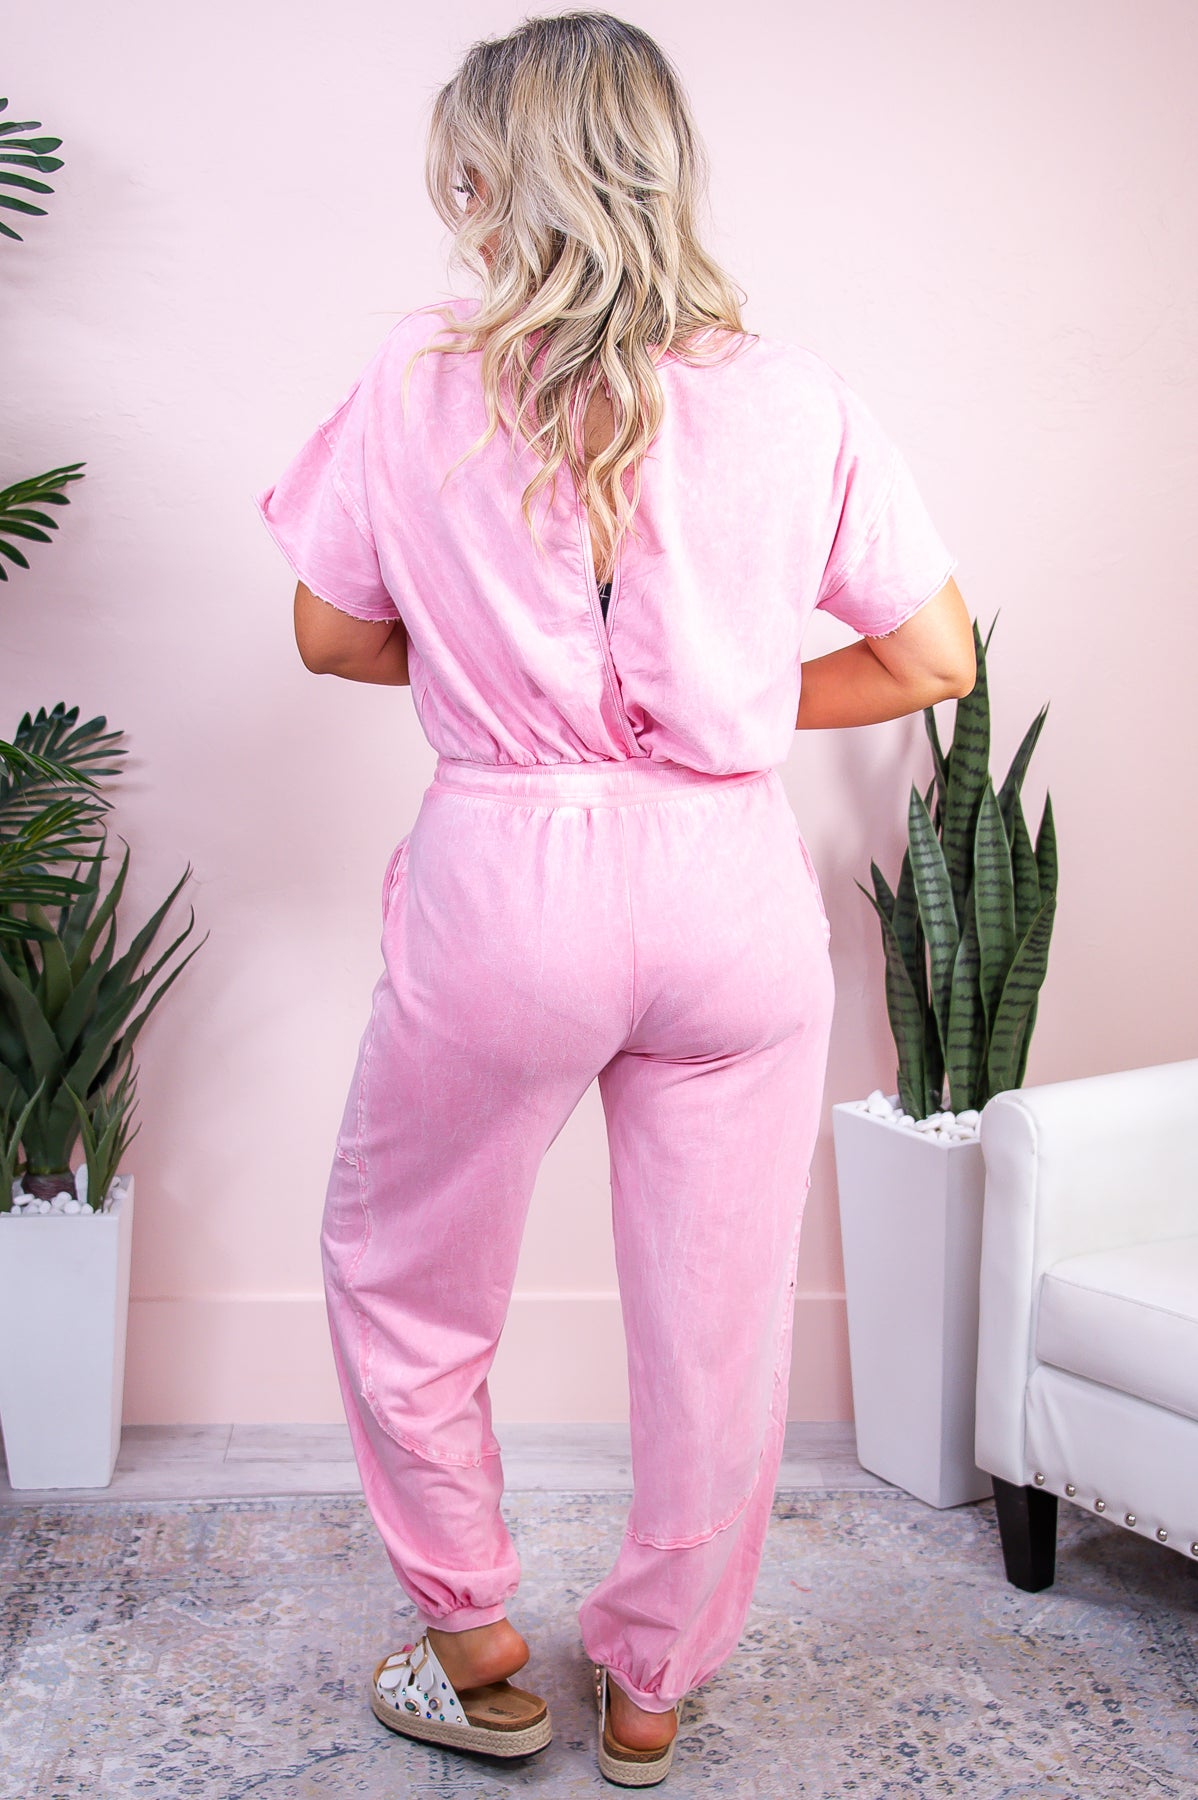 Shake Your Bunny Tail Vintage Pink Solid Romper - RMP773VPK